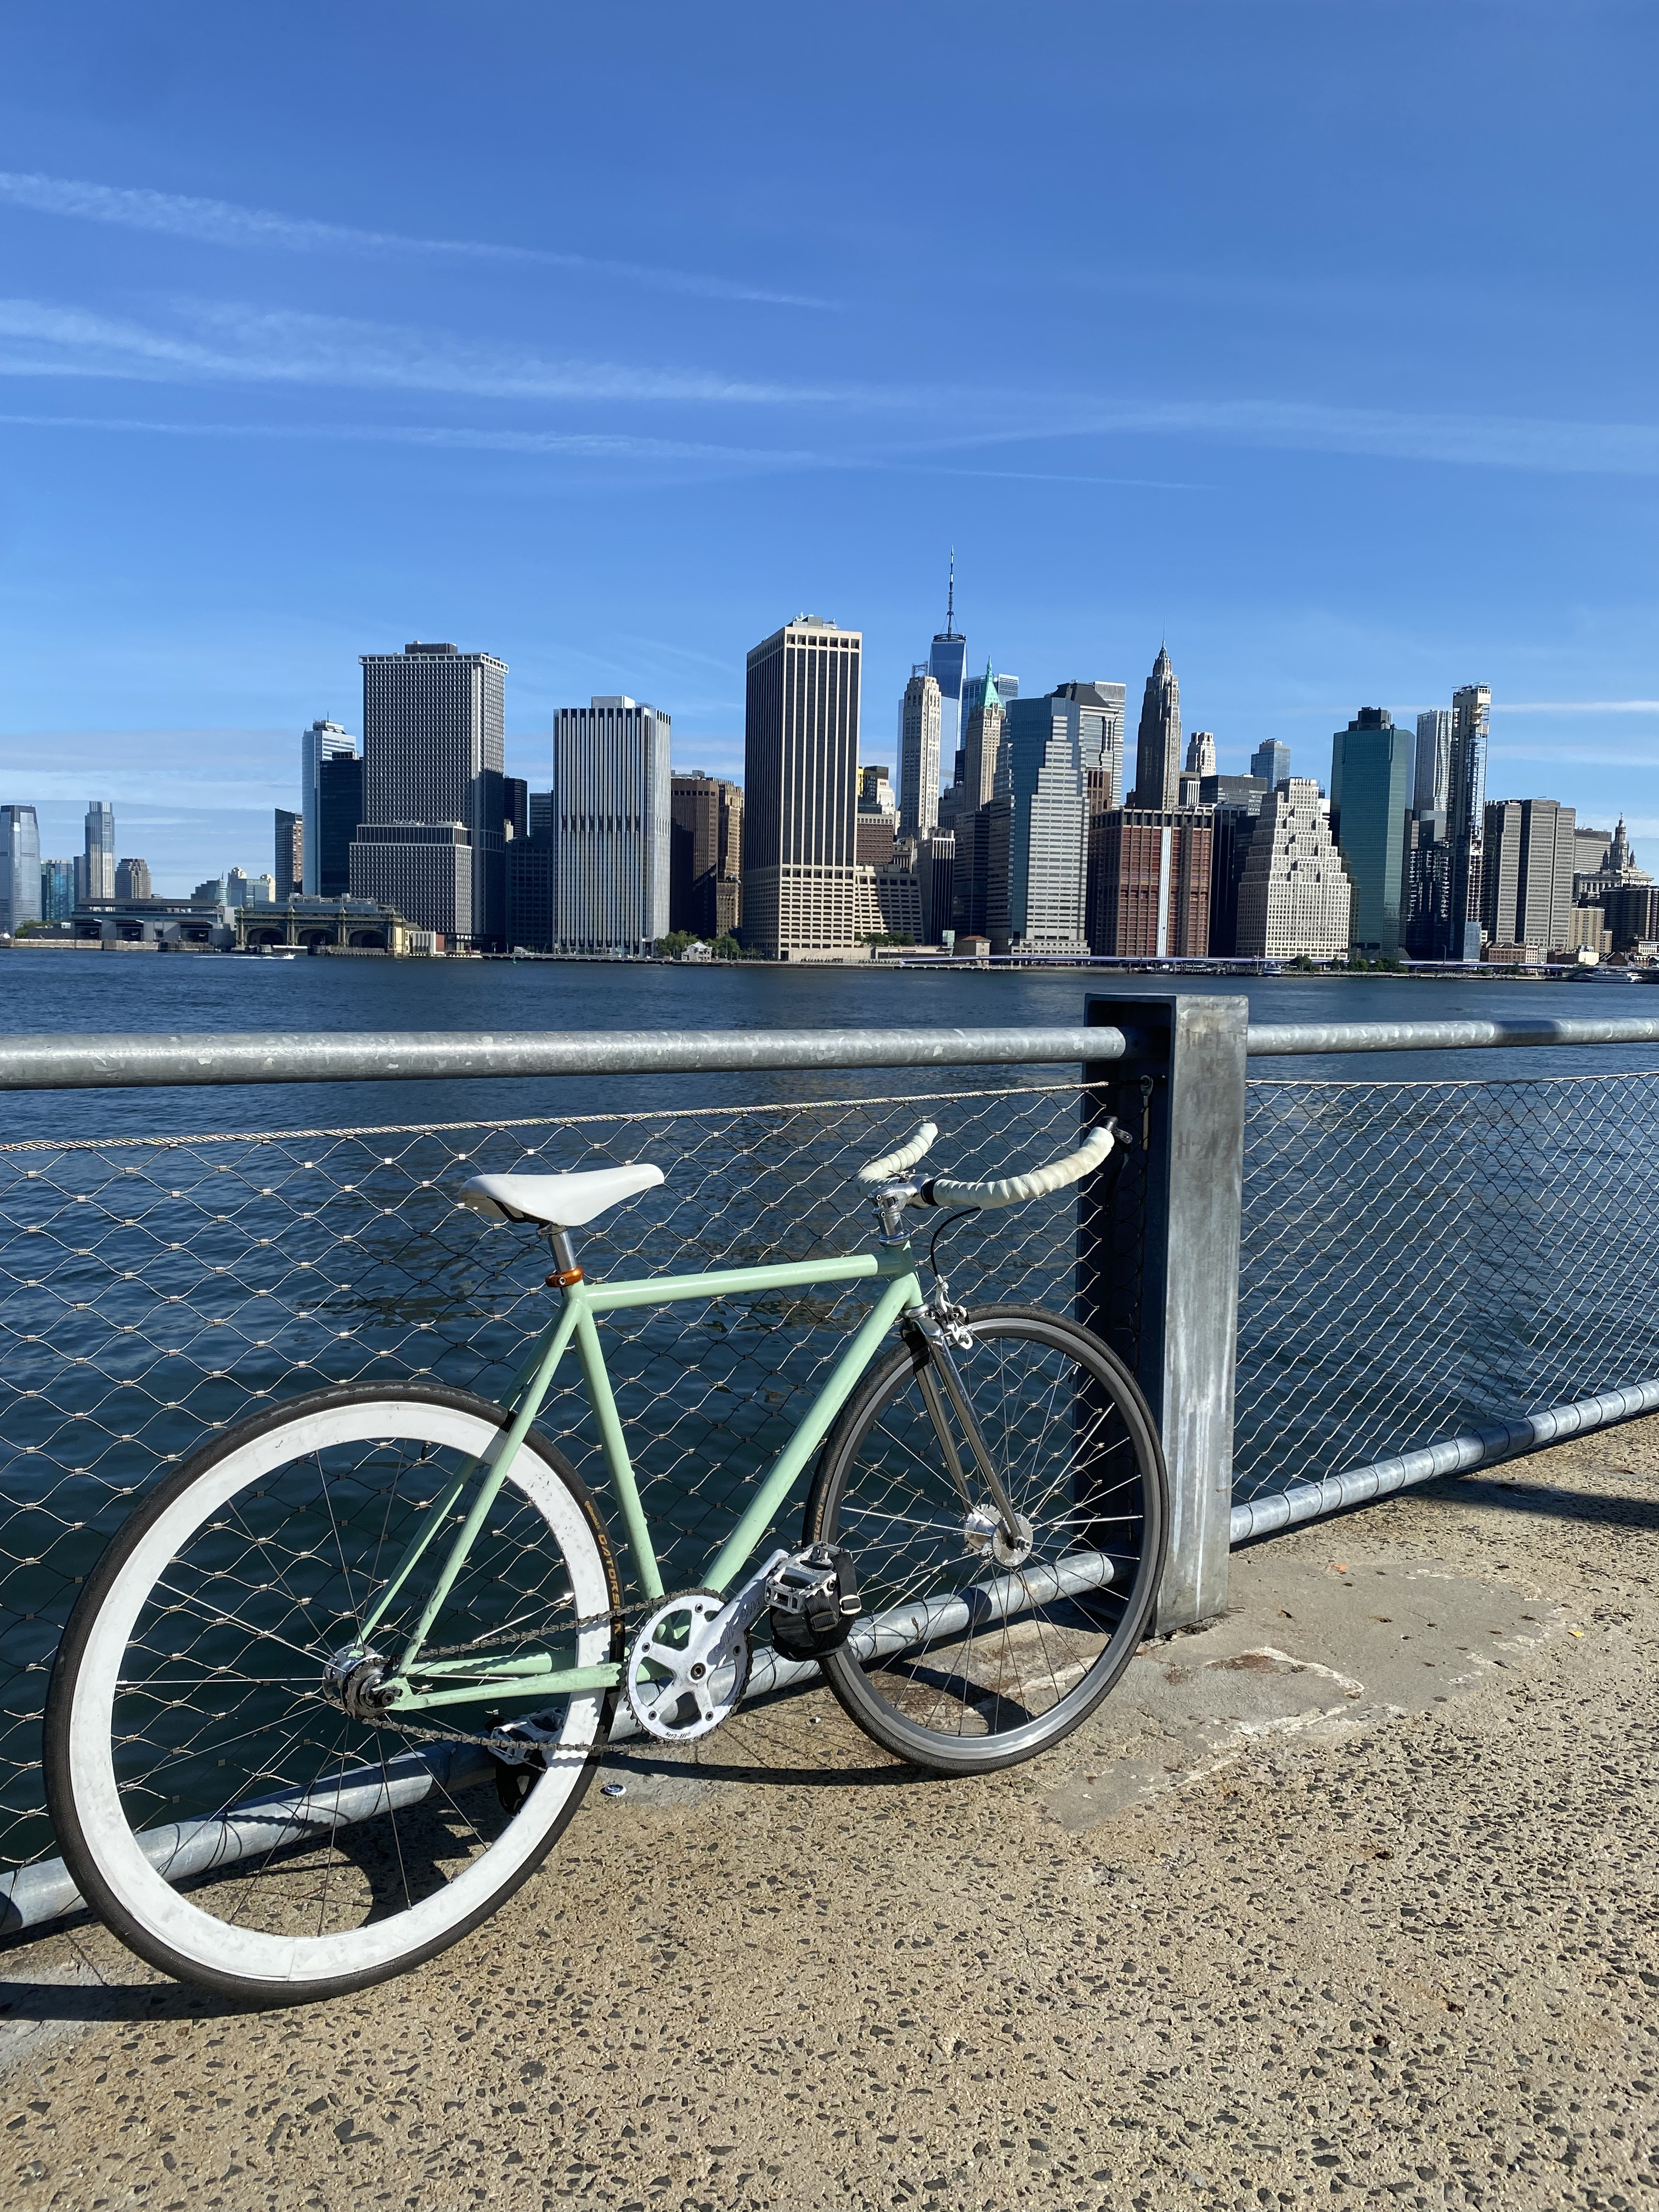 A portrait-oriented shot of my bicycle, a track bike with a mint green frame, set against a backdrop of the lower Manhattan skyline. The sky is blue